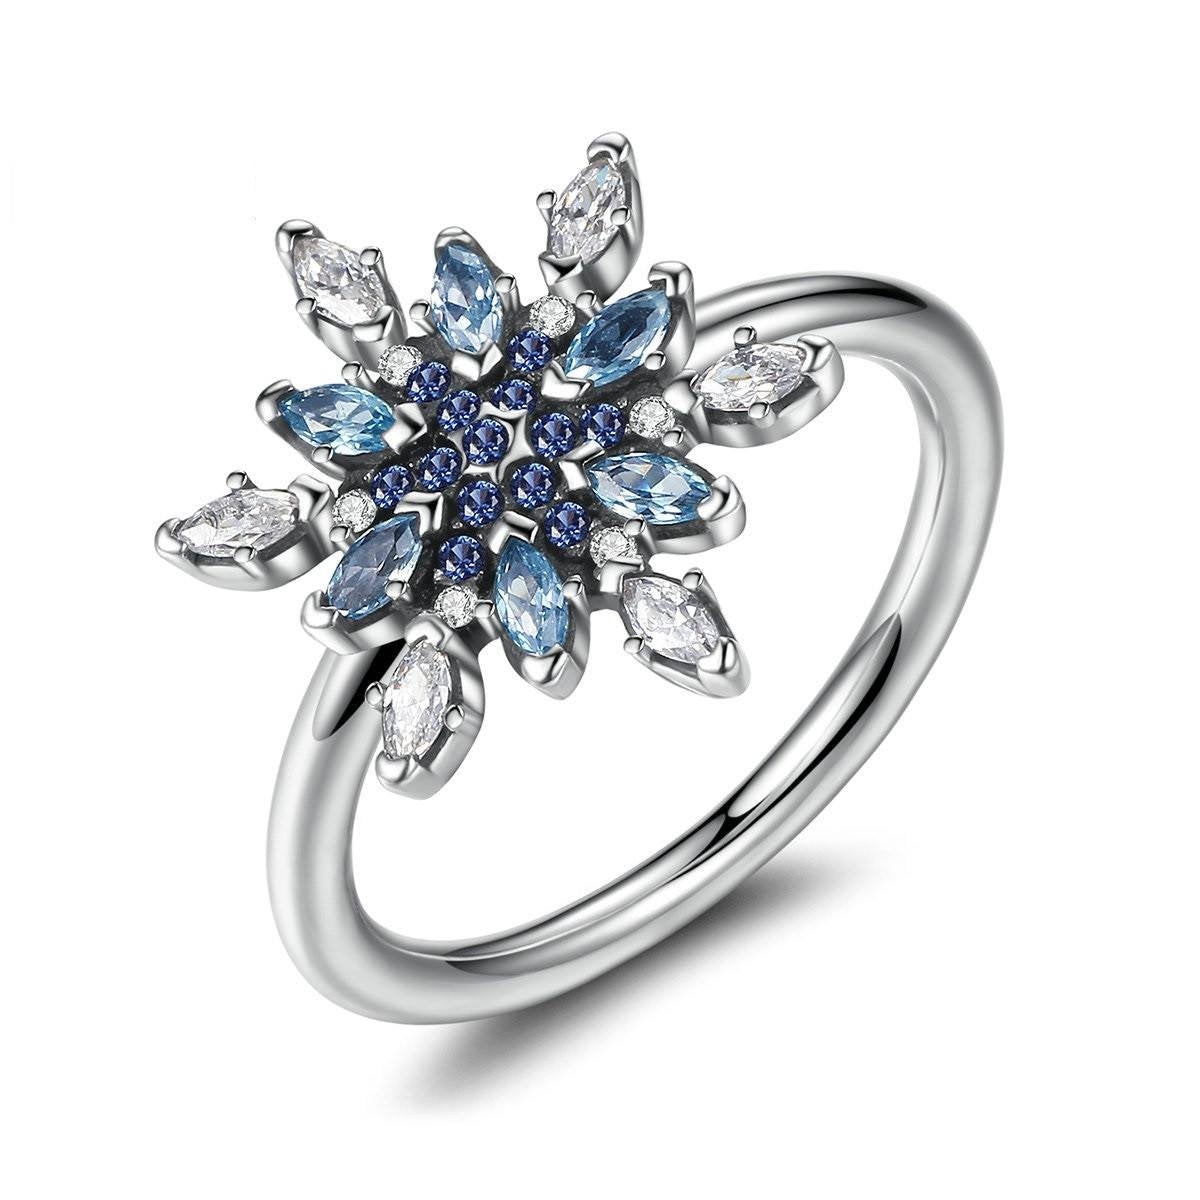 Blue Snowflake Silver Ring - Floral Fawna